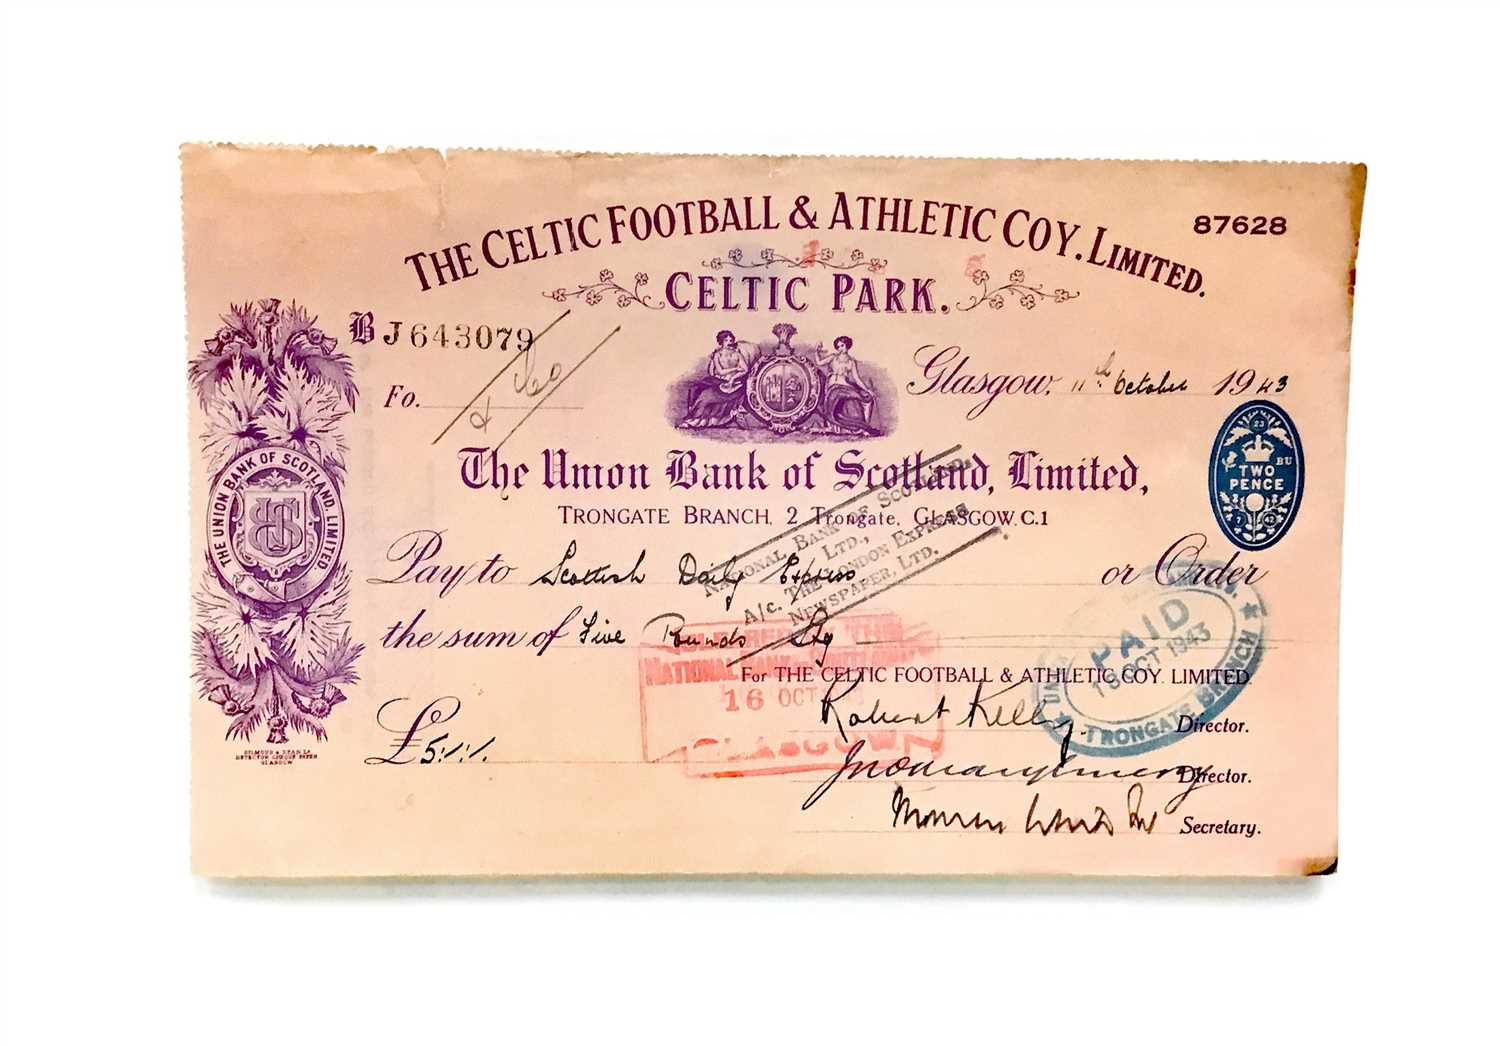 Lot 1990 - A CELTIC FOOTBALL & ATHLETIC COY. LIMITED CHEQUE